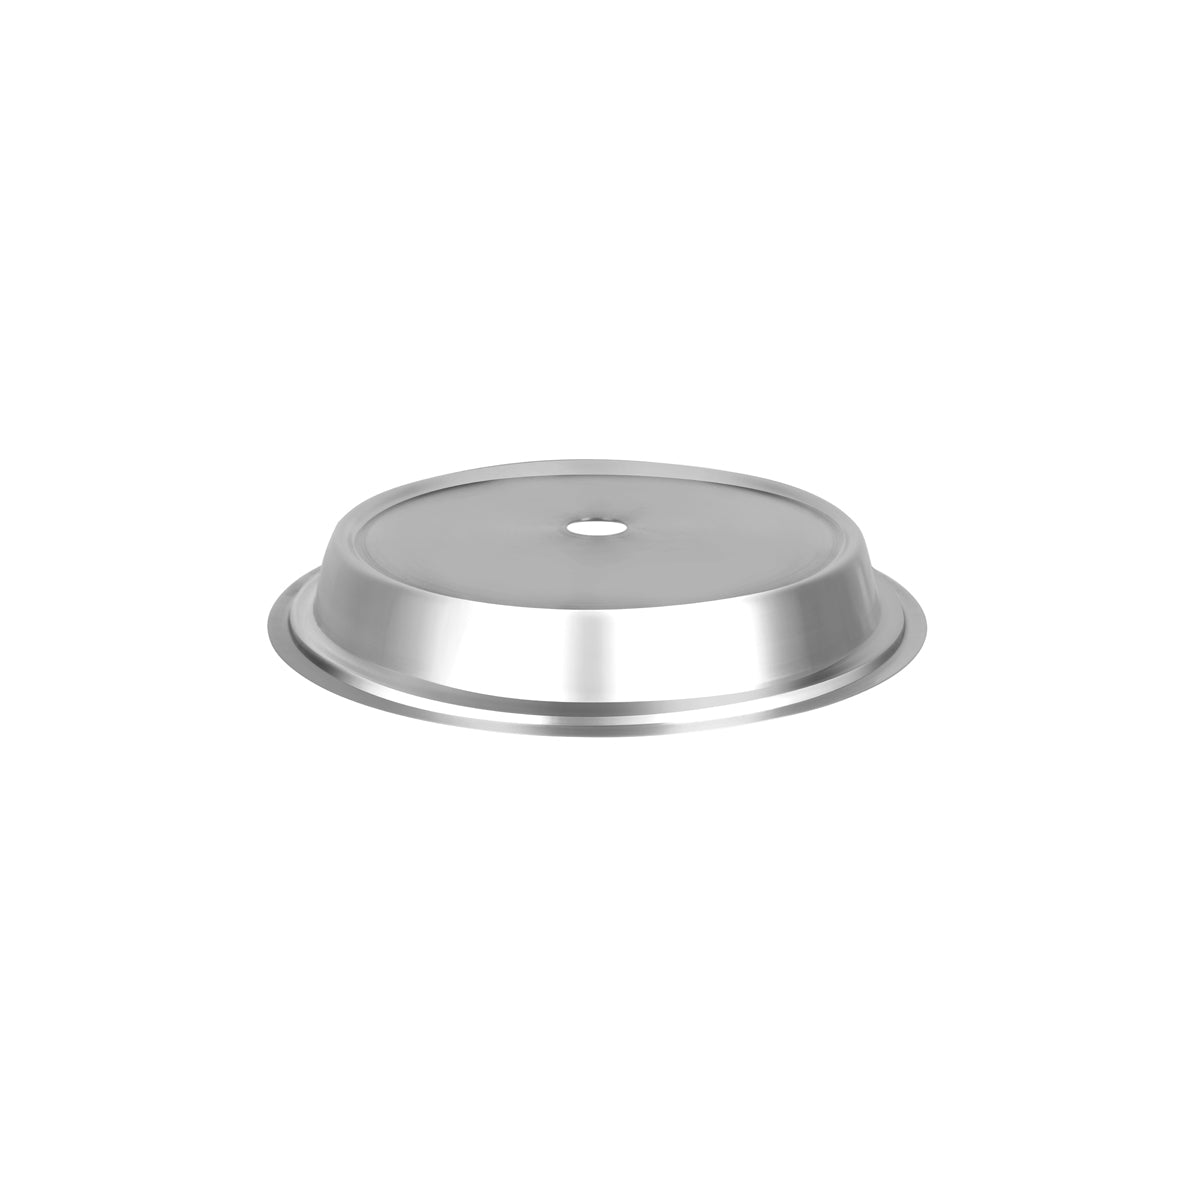 07734 Chef Inox Plate Cover Multi-Fit Stainless Steel 270mm/11" Tomkin Australia Hospitality Supplies